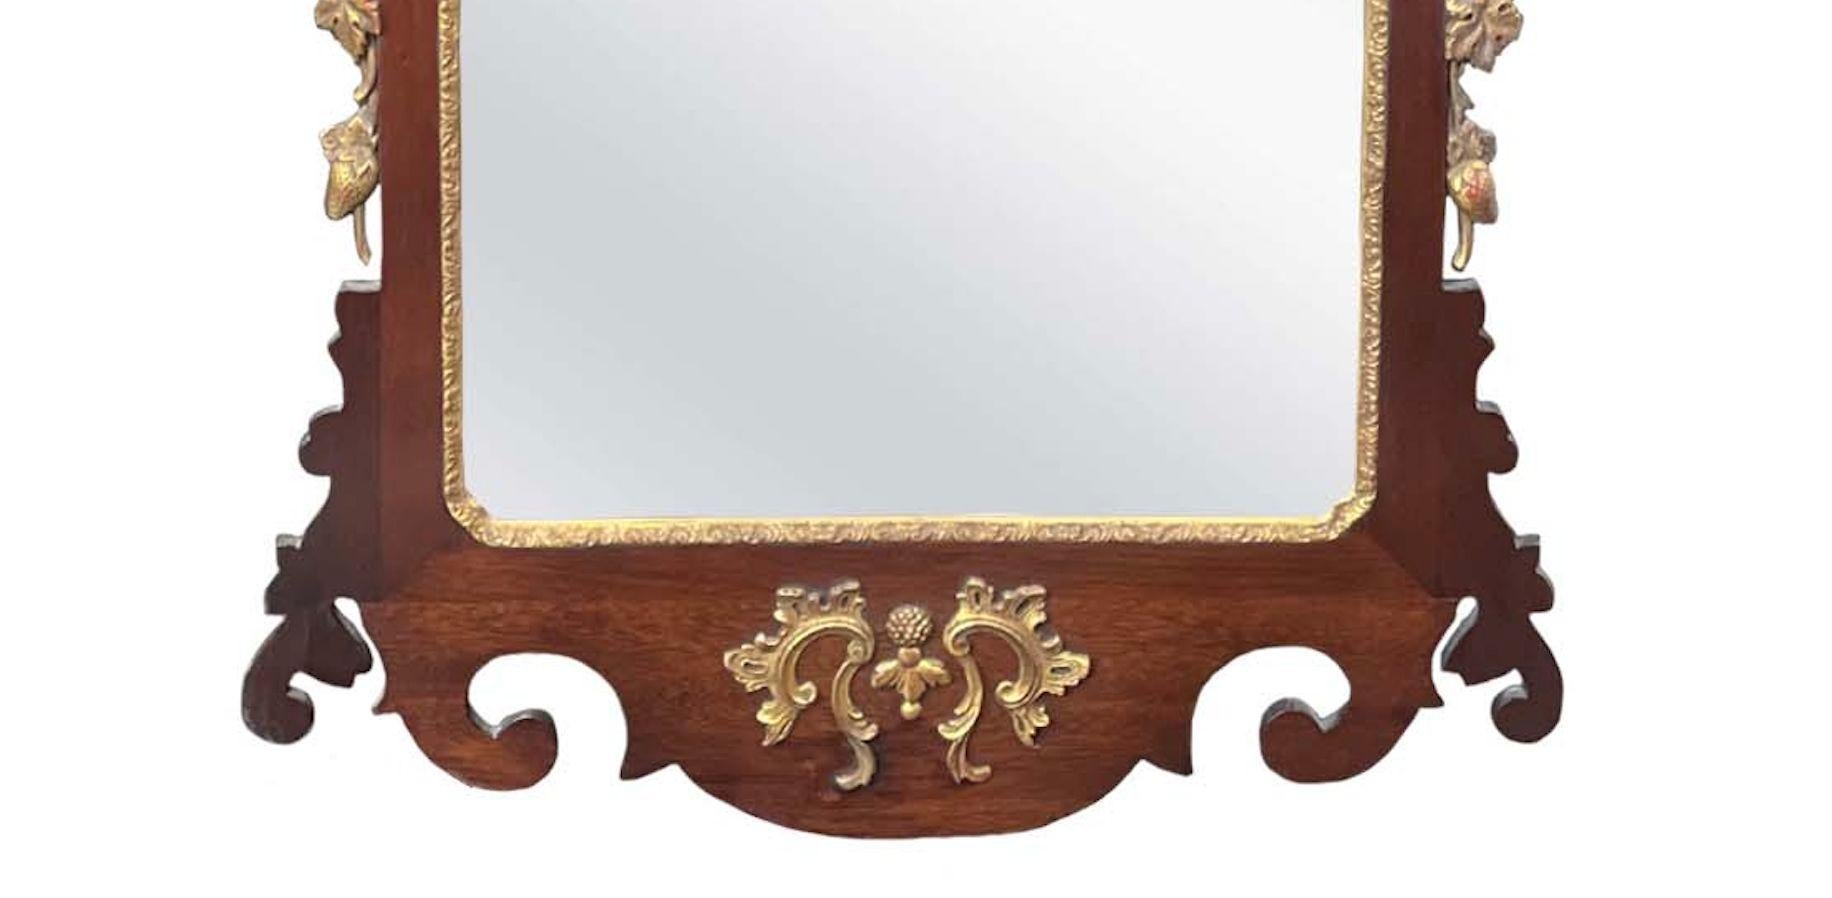 Chippendale George II style carved mahogany mirror depicting a ho-ho bird on top and strawberry stolons . American, 18th Century.
Dimensions:
48